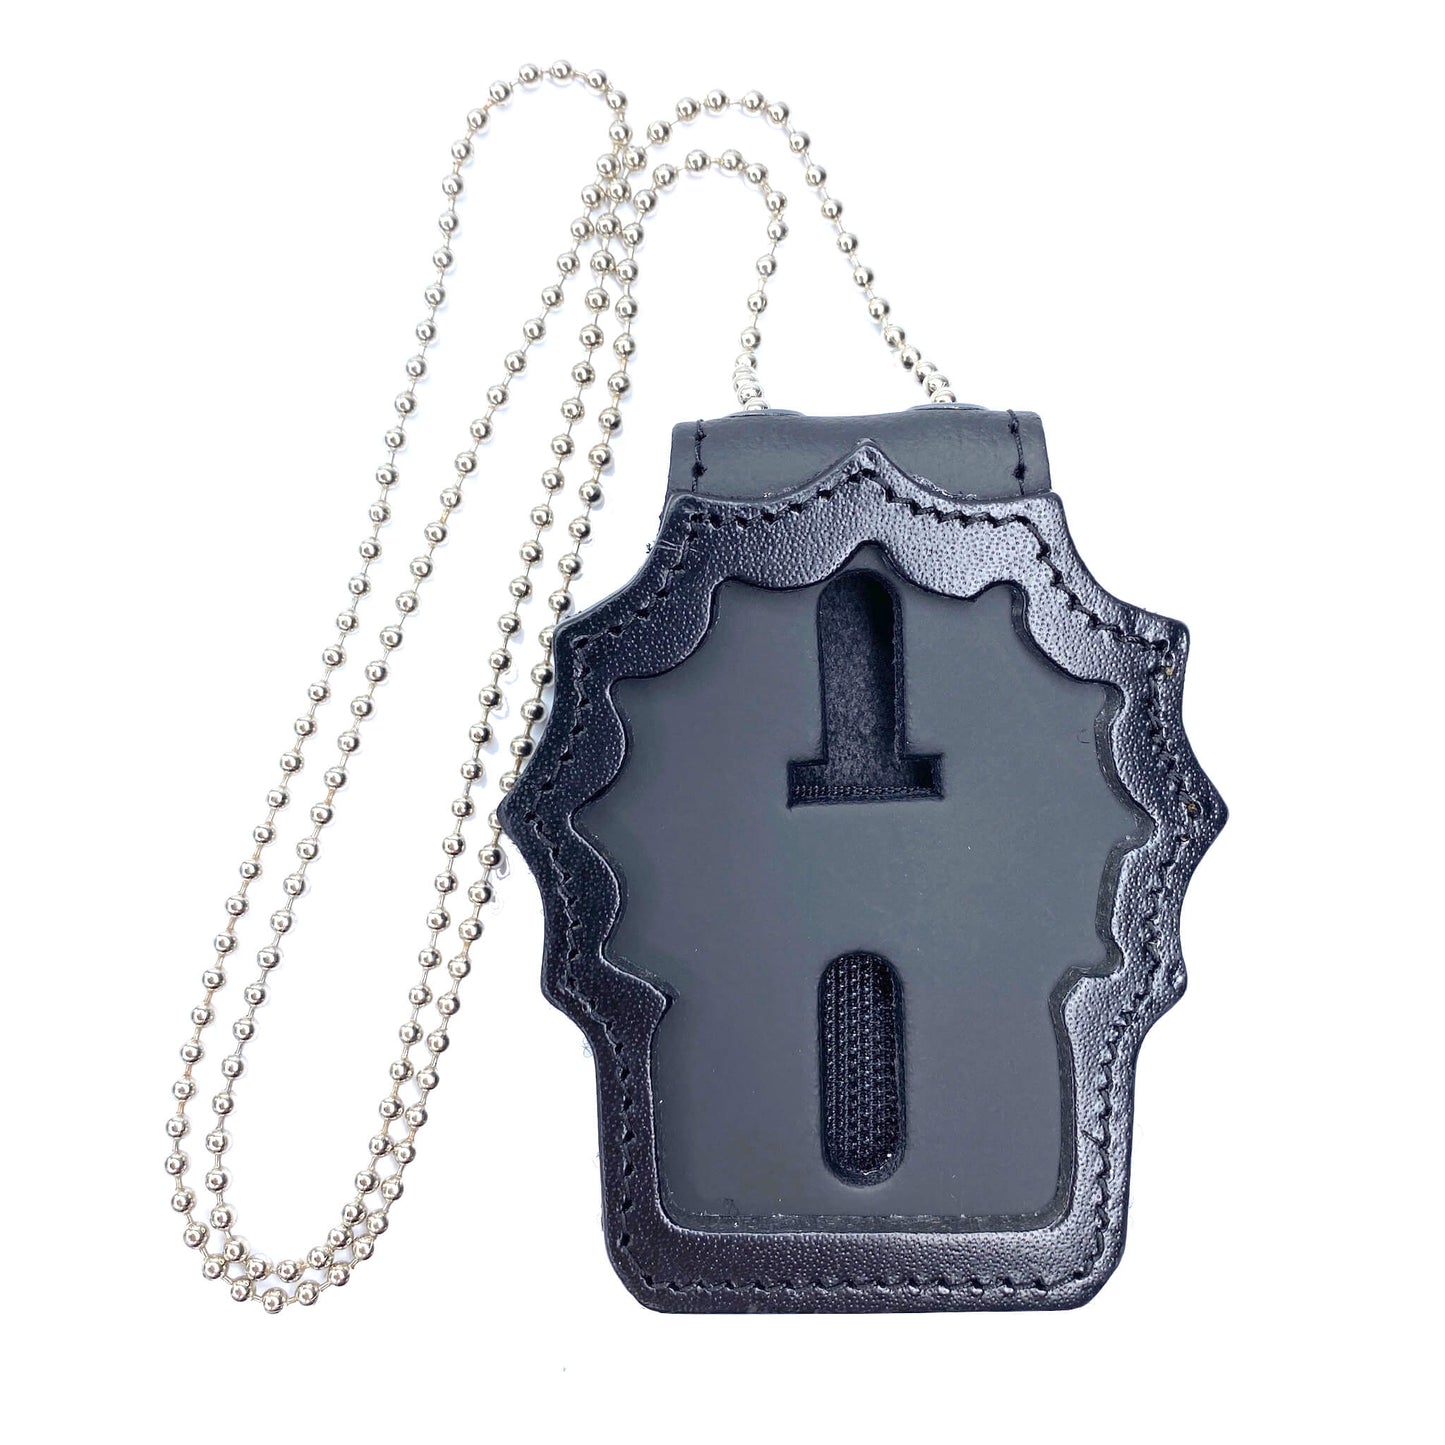 New York Police Department (NYPD) Detective Badge Belt Holder & Neck Chain-Perfect Fit-911 Duty Gear USA